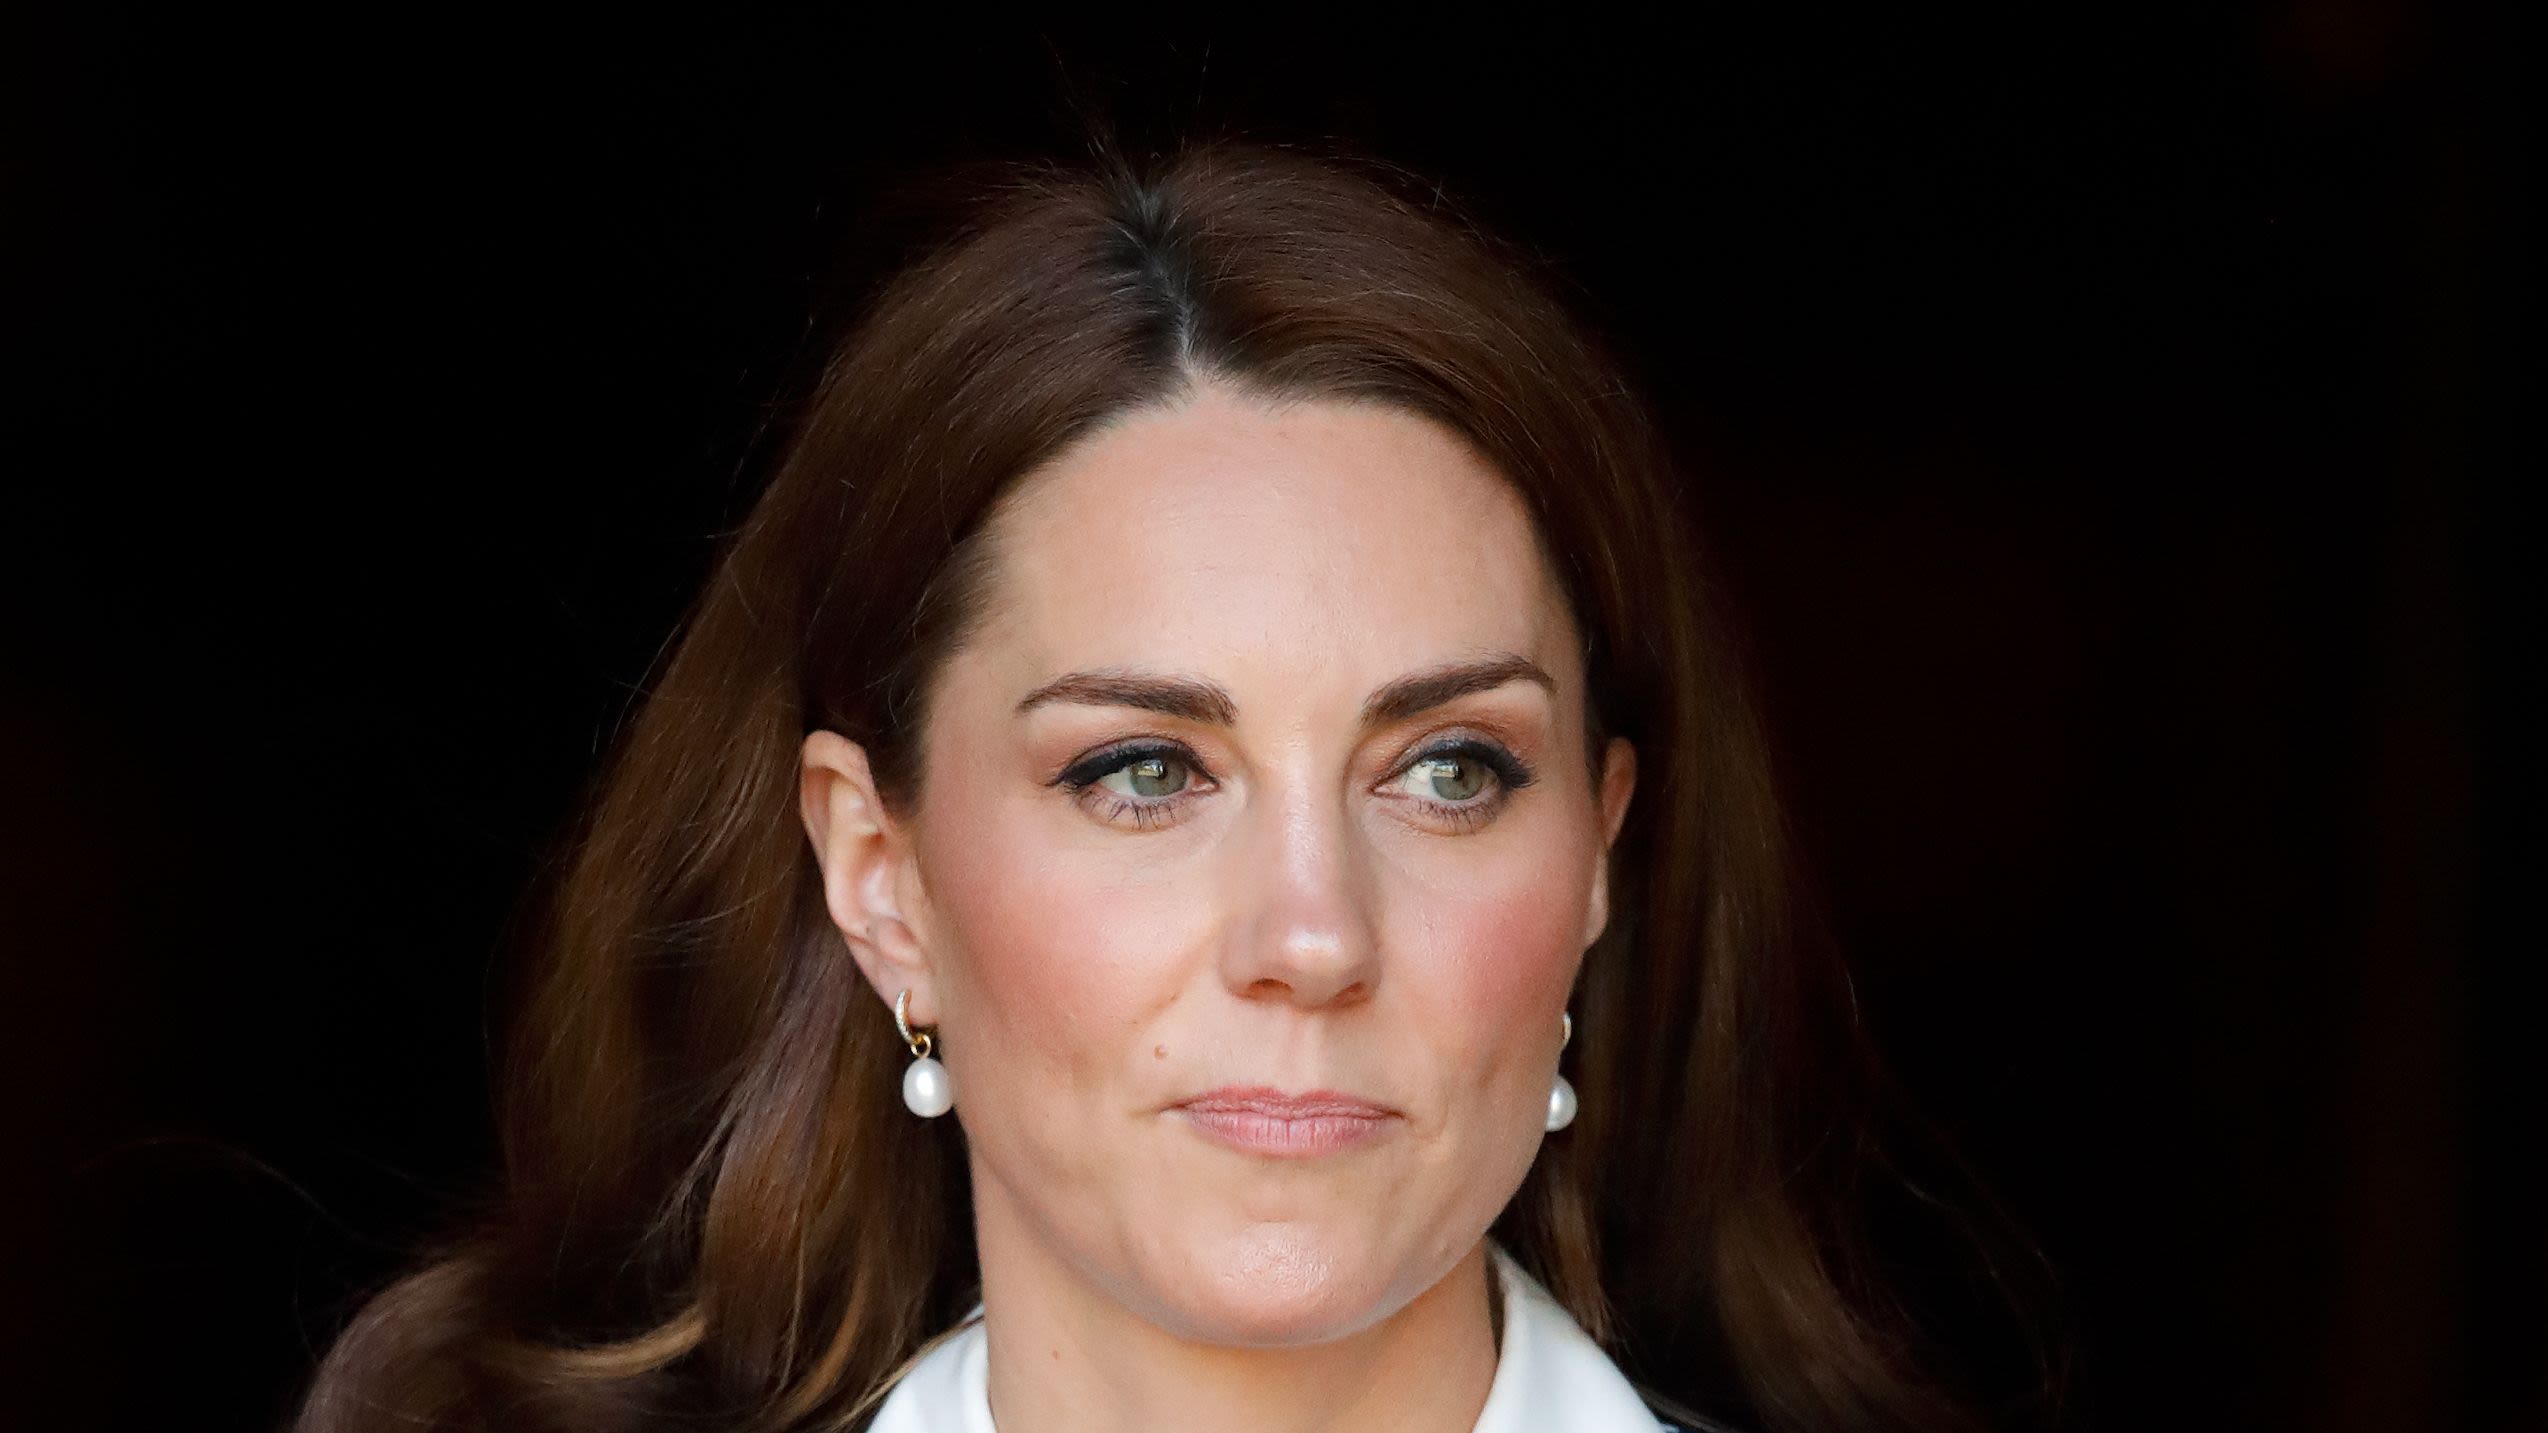 Where Is Kate Middleton? Everything We Know So Far About Her Absence from Royal Duties